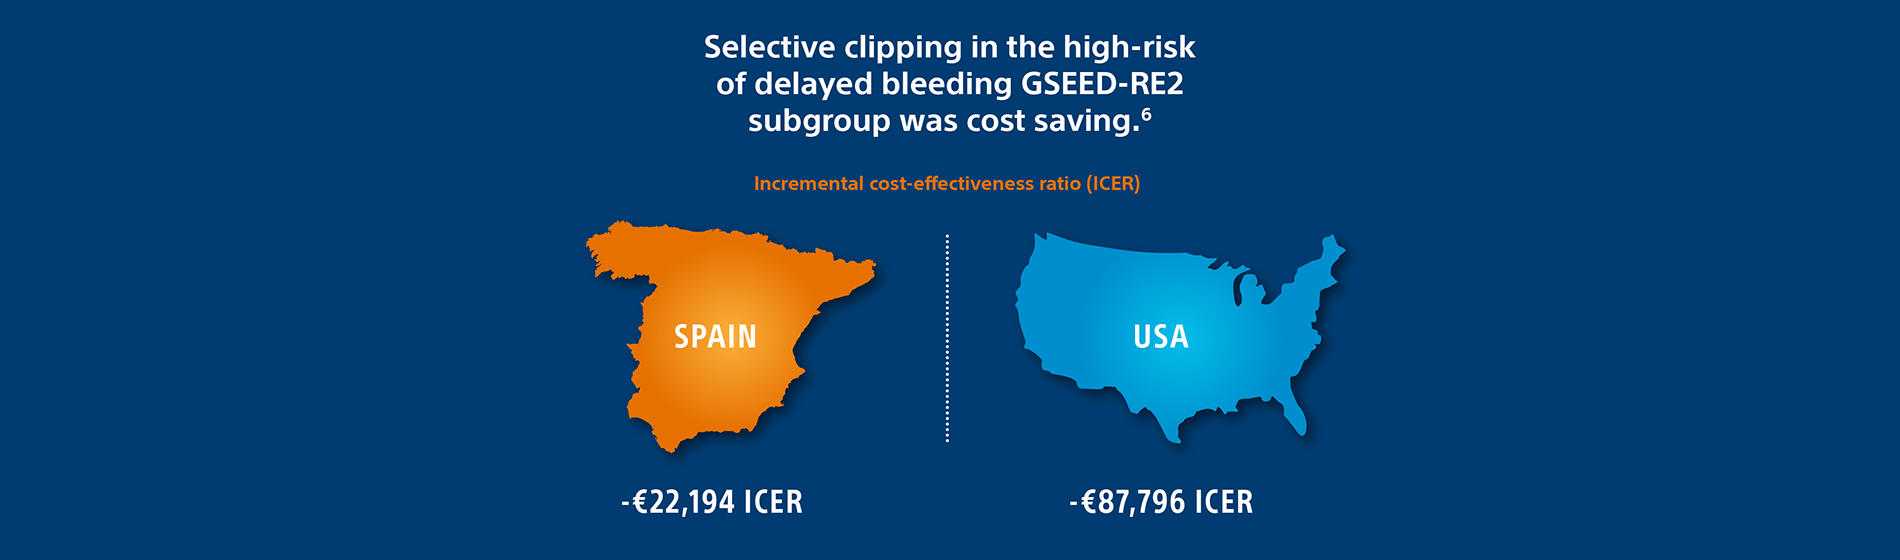 country wise cost saving